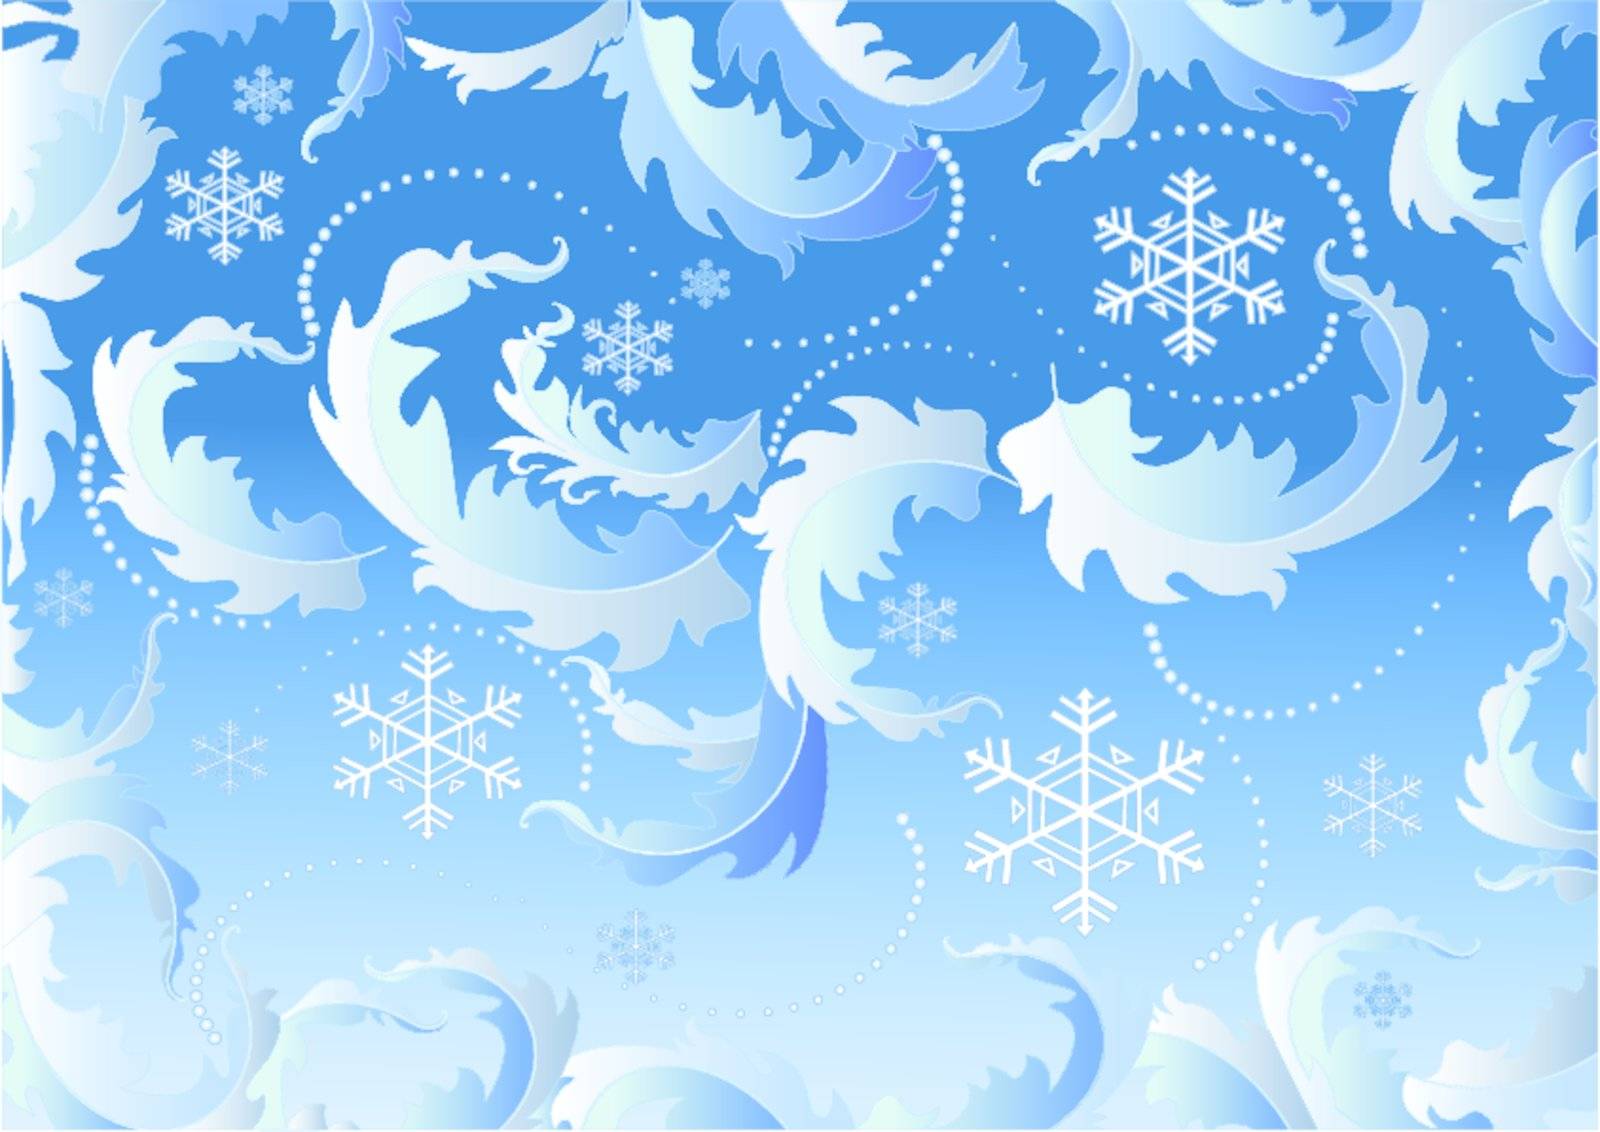 Background with snowflake greeting card with the Christmas